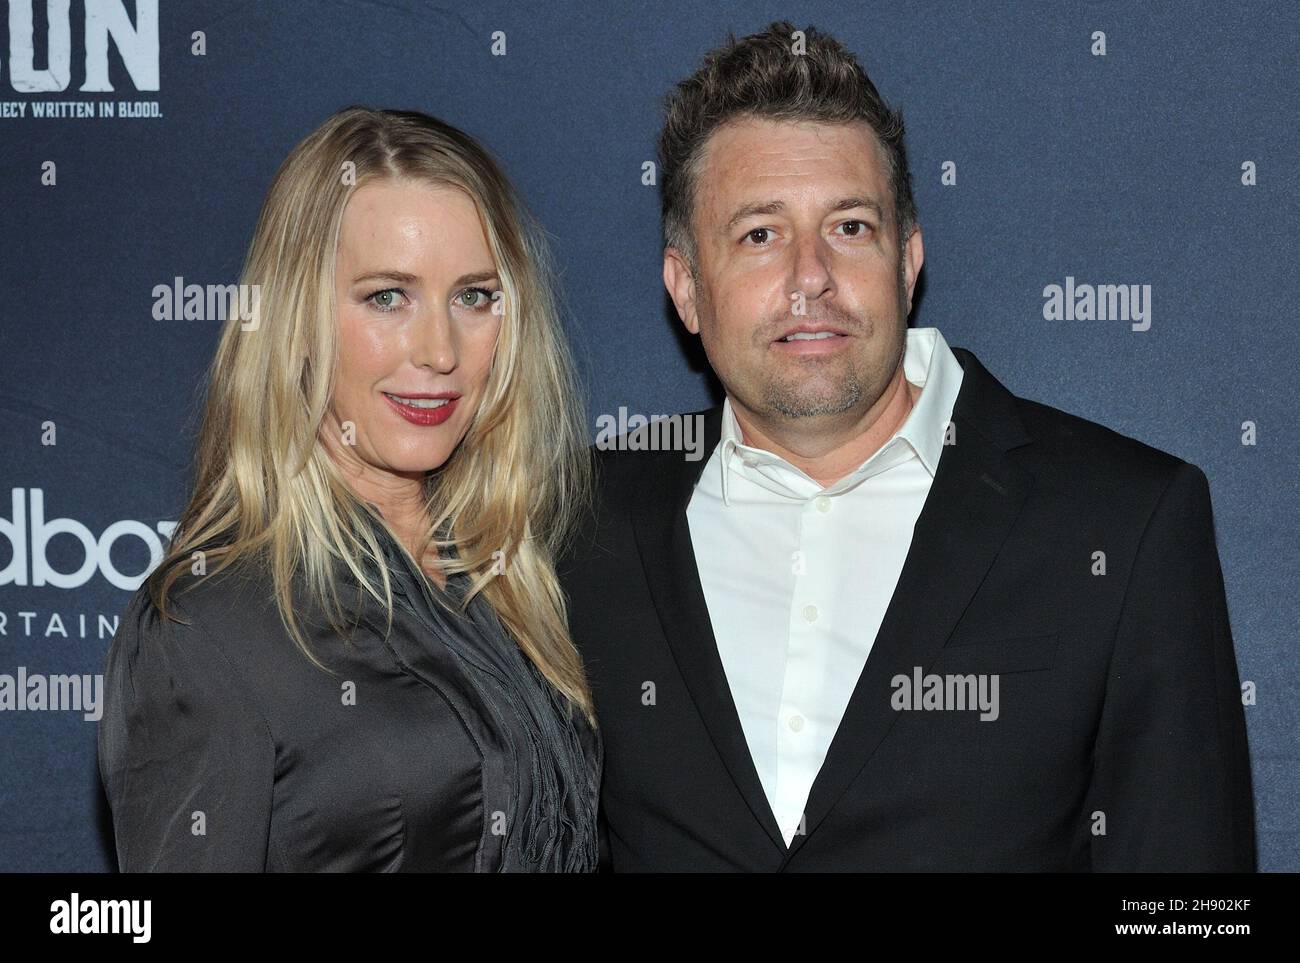 L-R: Amy O'Neill and Andre Relis attend the NY screening of The Last ...